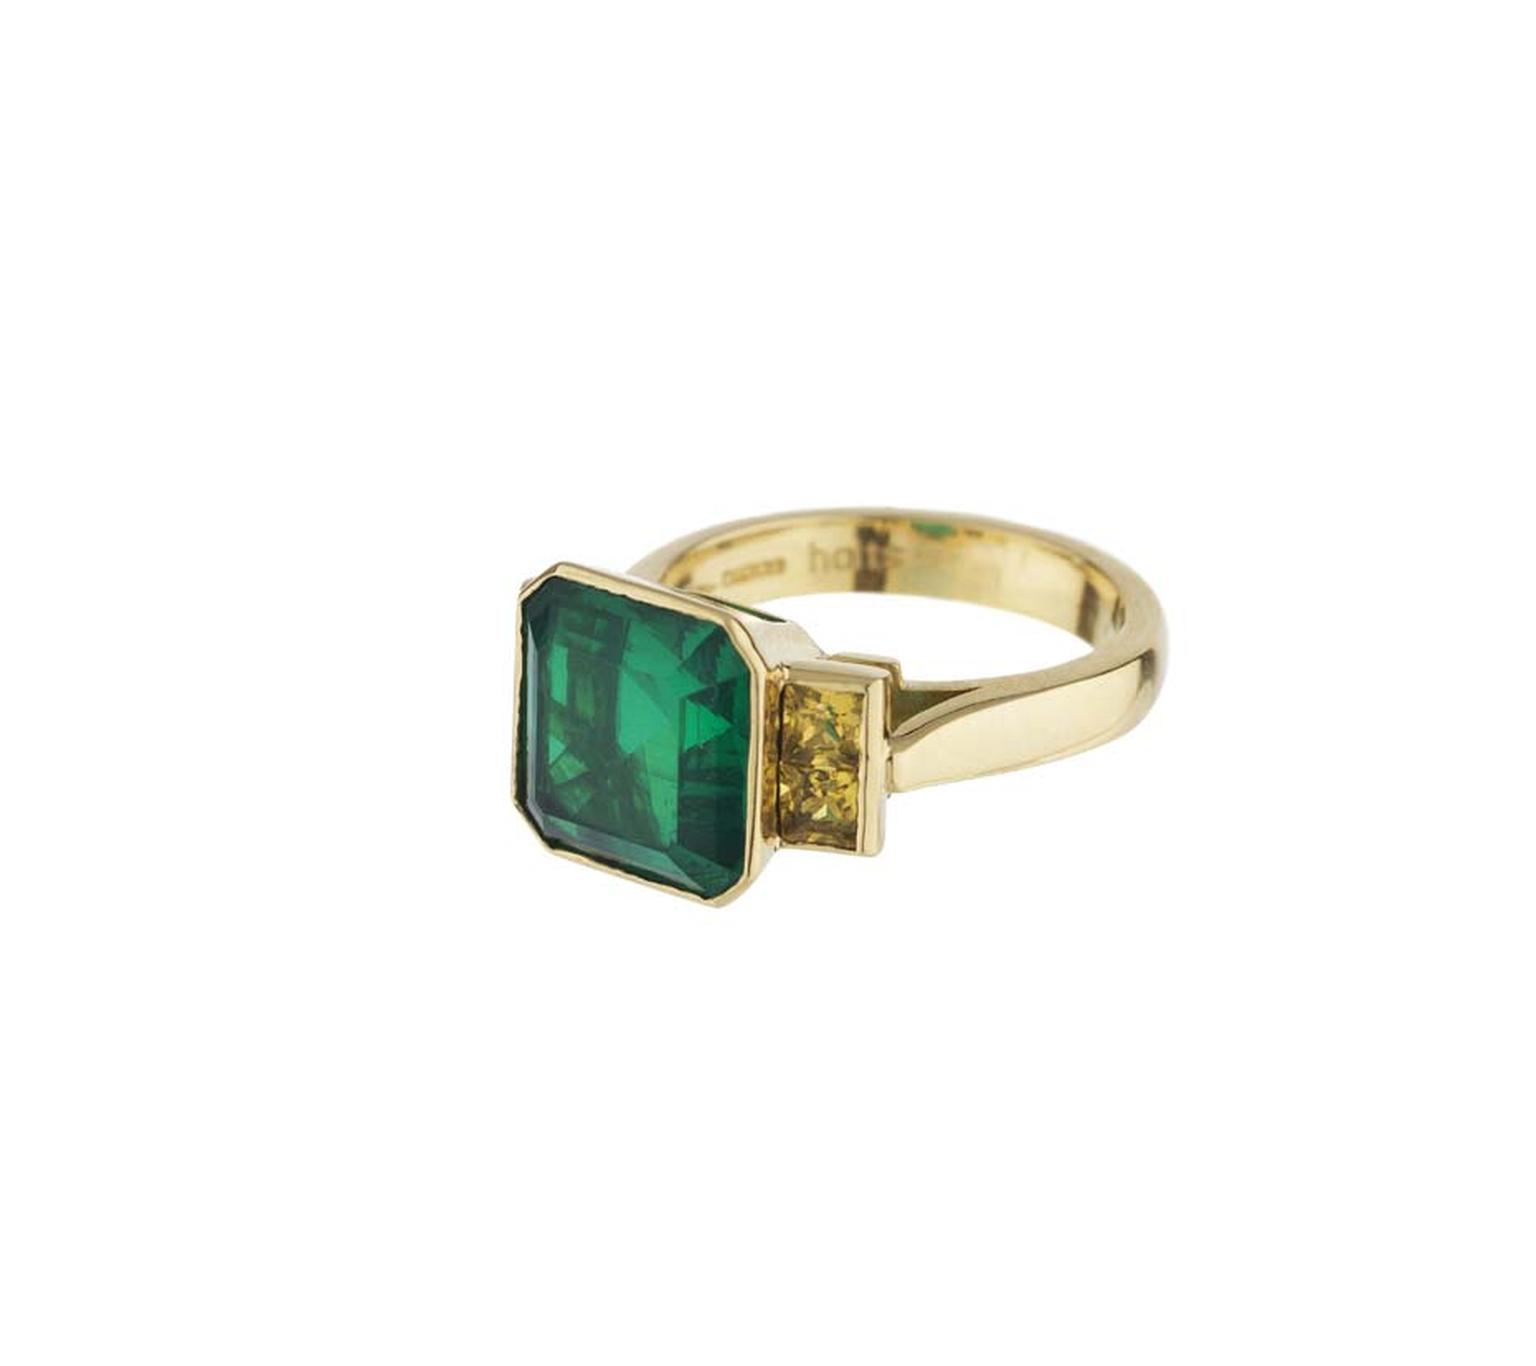 Holts London collection yellow gold Strand ring featuring a doublet centre emerald with yellow sapphire set shoulders.